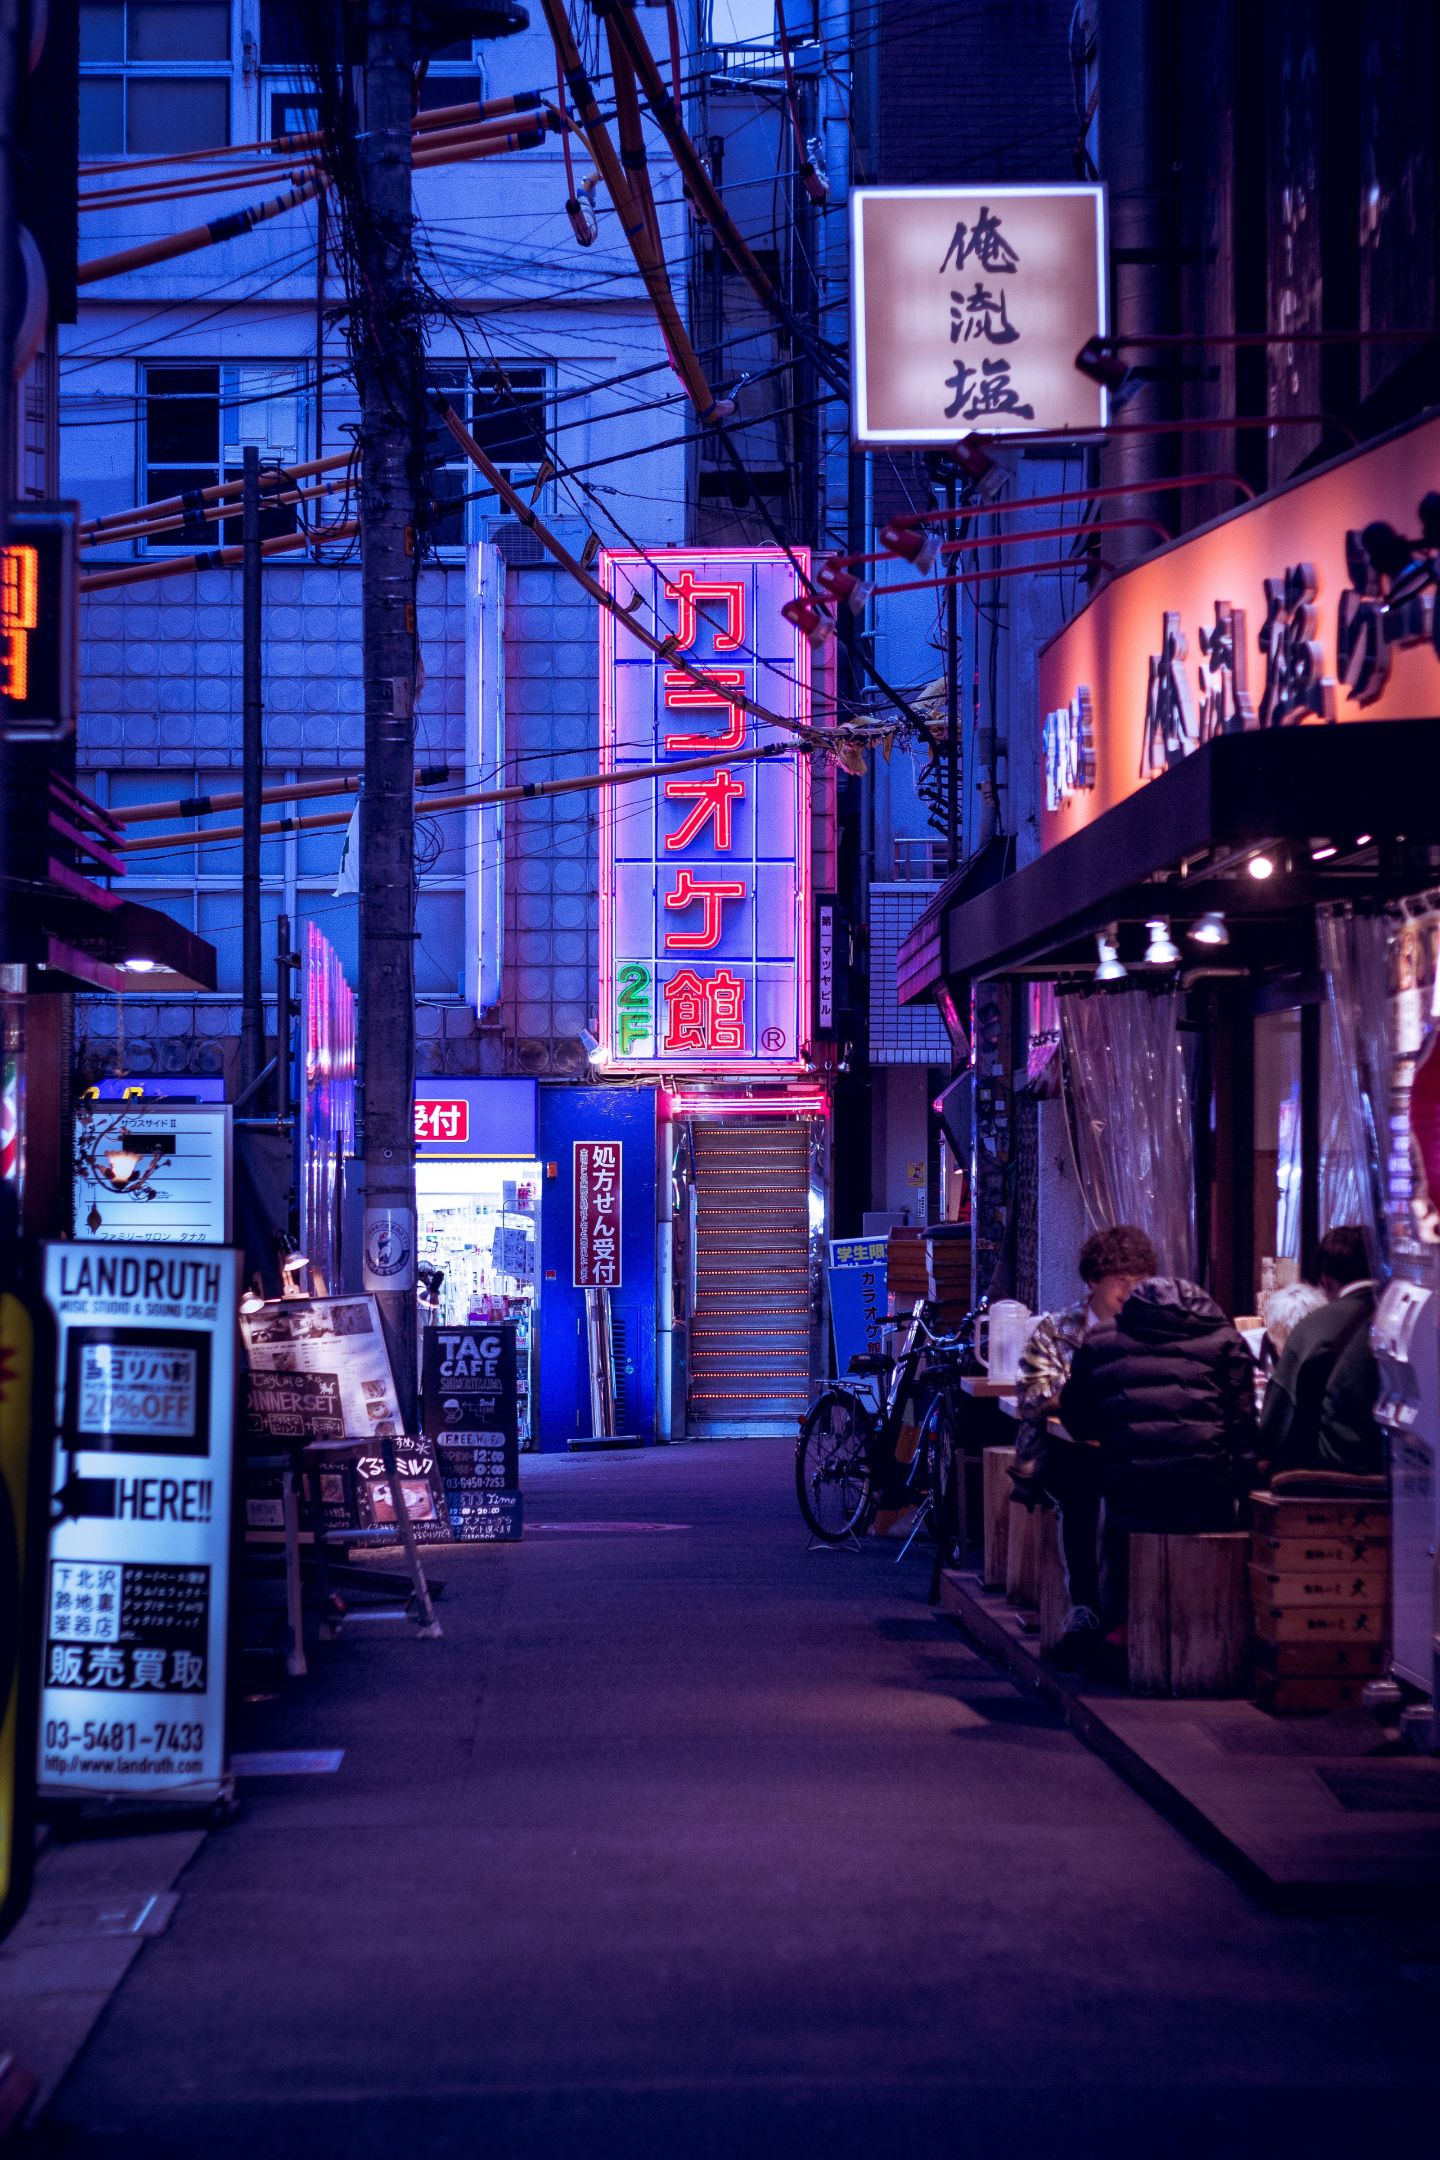 A night scene of a Tokyo side street featuring neon signs, bicycles and people enjoying food in the street